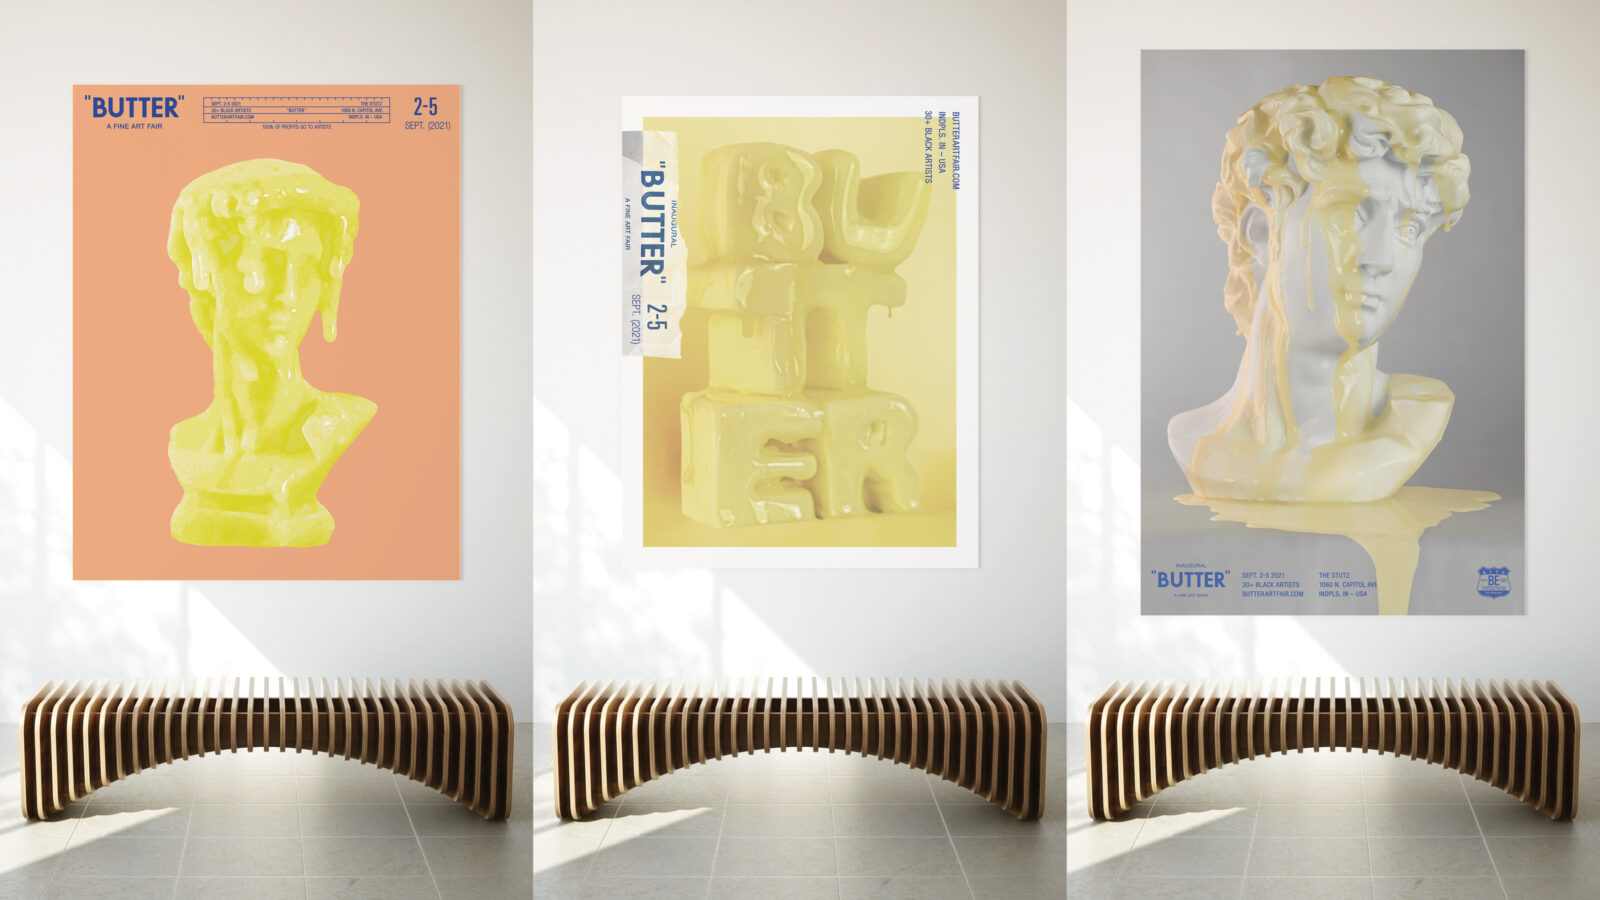 butter posters on a gallery wall